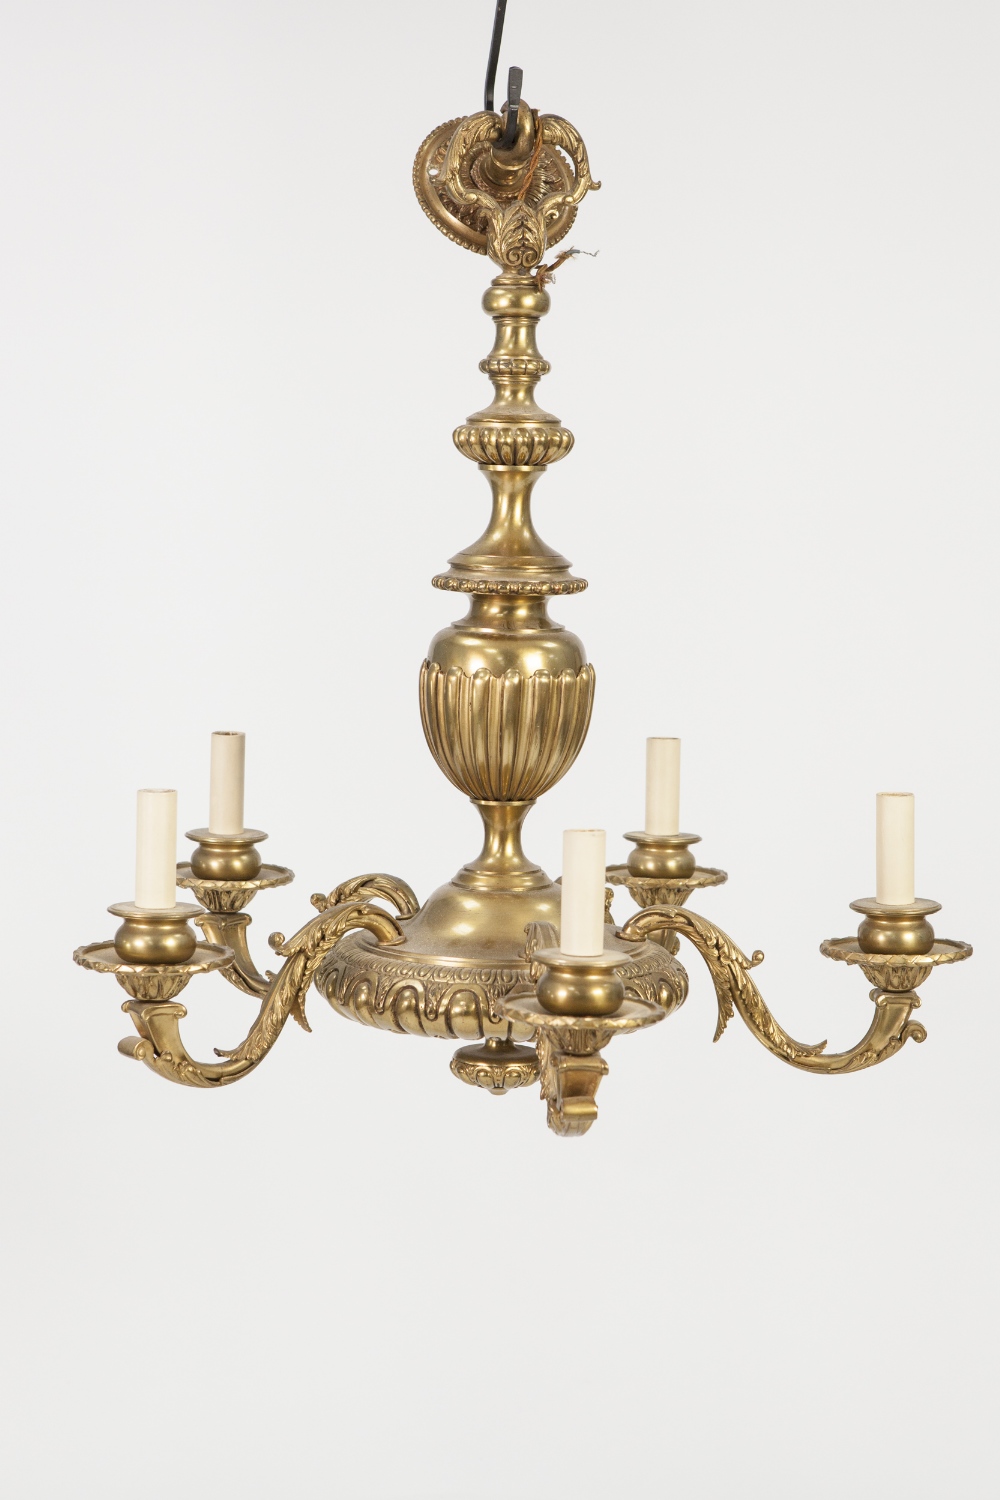 HEAVY PAIR OF ORMOLU FIVE LIGHT ELECTROLIERS, each with acanthus scroll arms and candle pattern